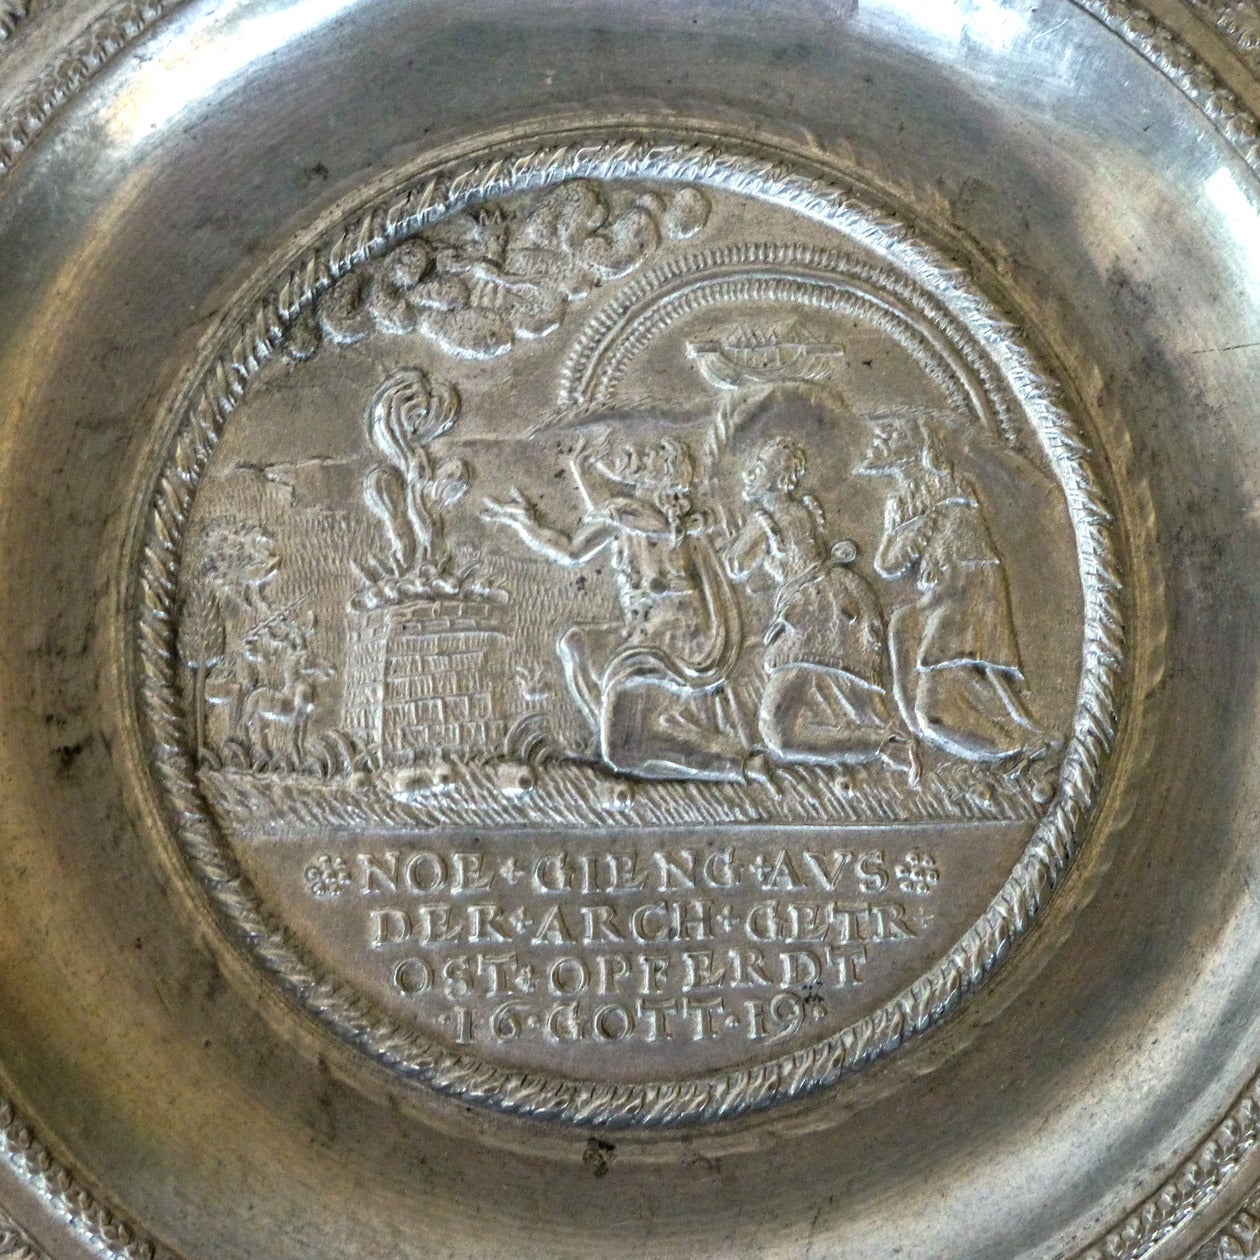 German Pewter Plate, Dated 1619.

A so-called ‘Kurfurstenteller’, the center with the sacrifice of Noah and an inscription below:

NOE.GIENG.AVS.DER.ARCH.GETR

.OST.OPFERDT. 16.GOTT.19

Surrounded by four oval fields incorporating various